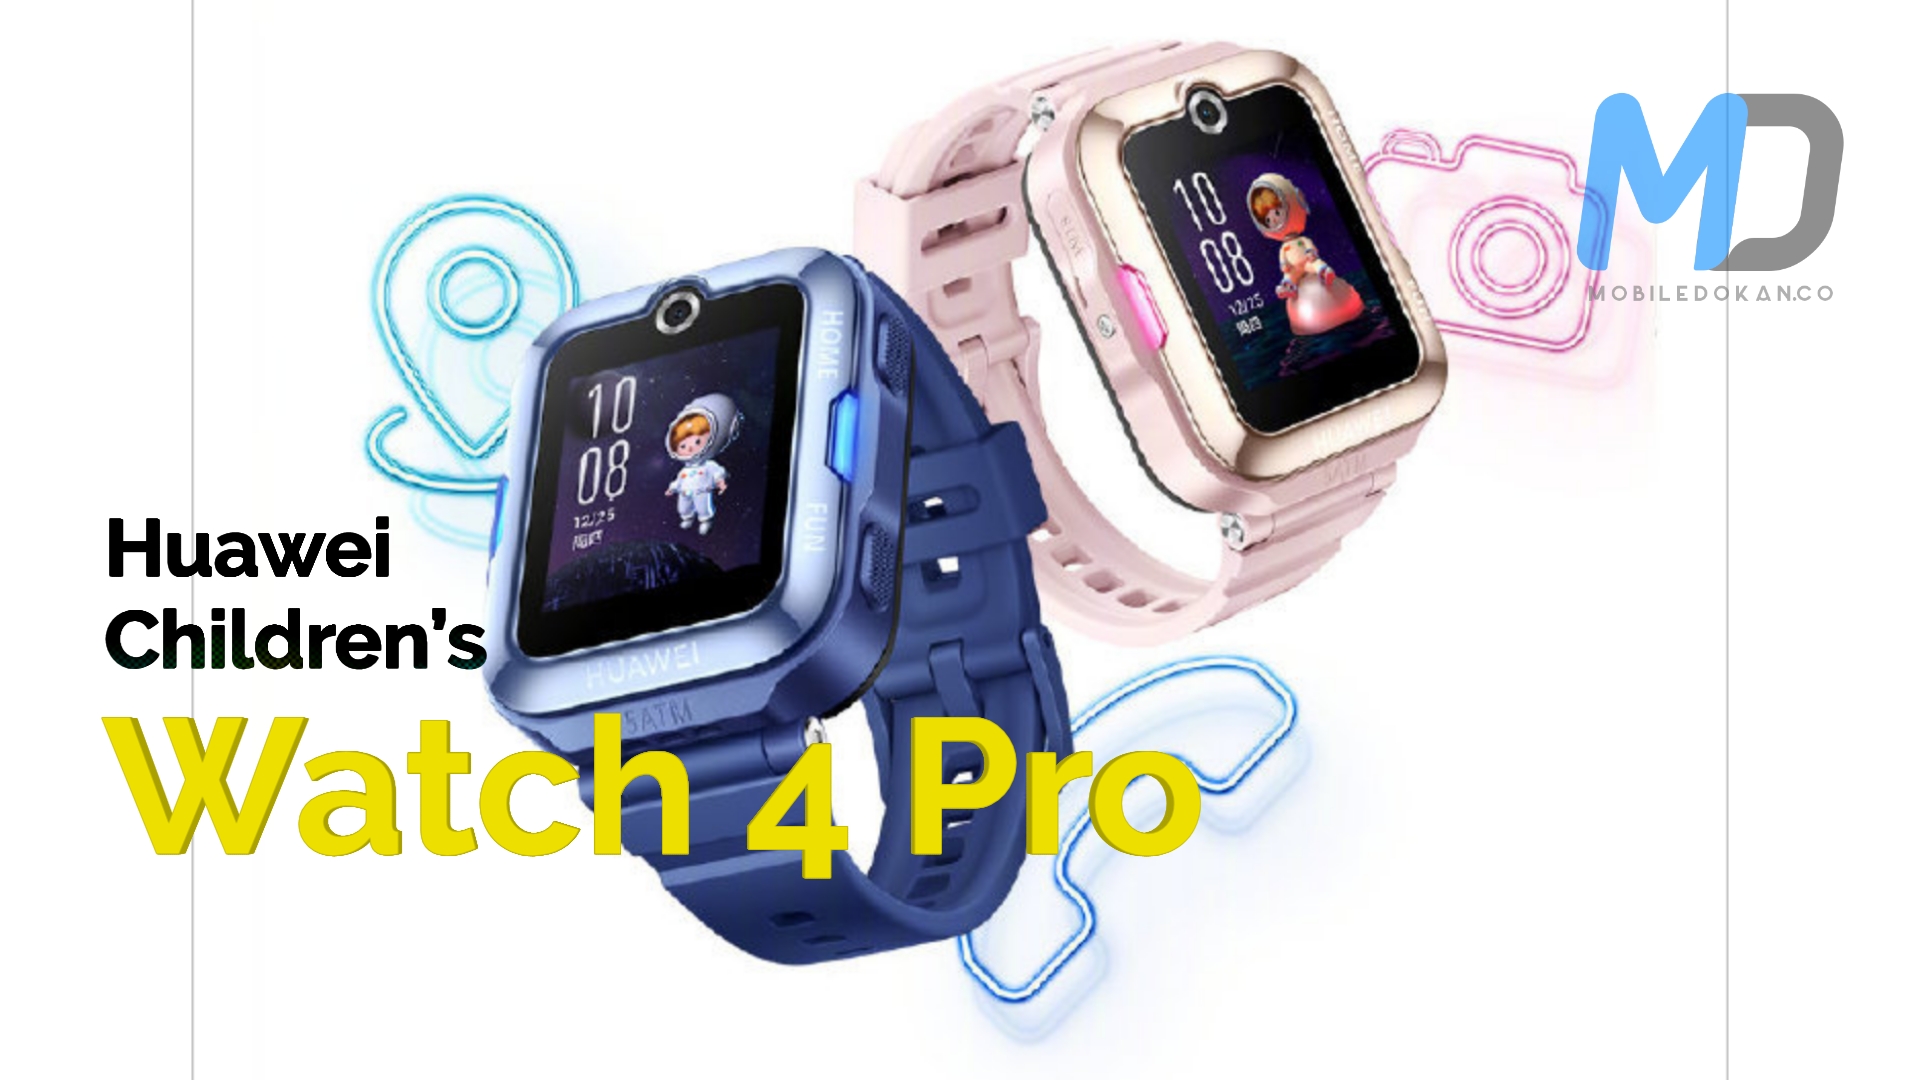 Huawei reveals the Children’s Watch 4 Pro priced at ¥998 ($154)